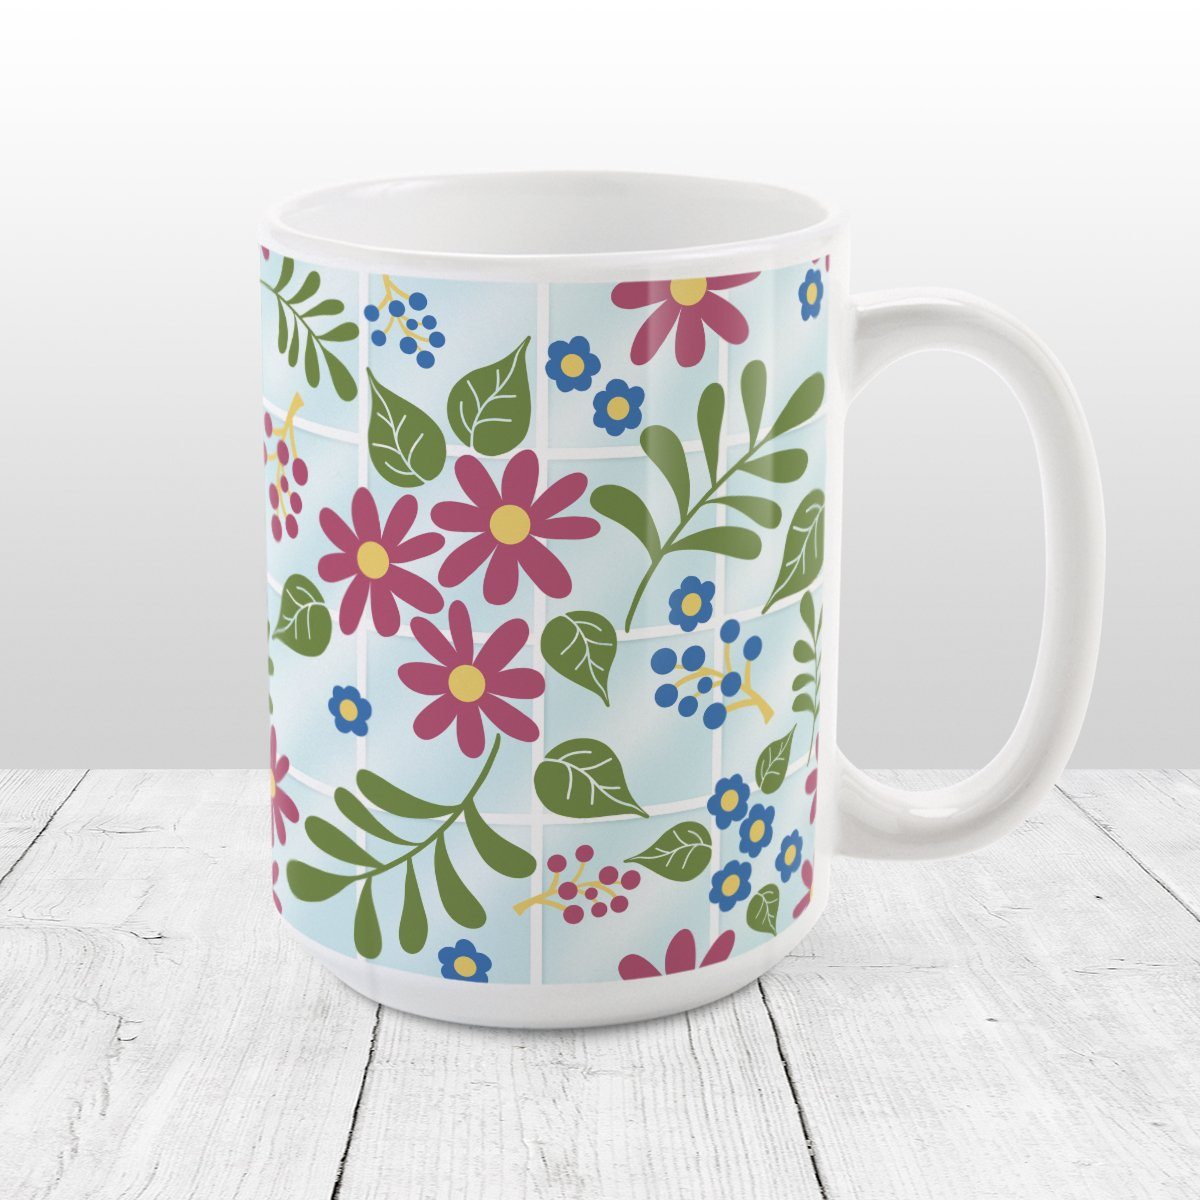 Flowers in the Greenhouse Mug (15oz) at Amy's Coffee Mugs